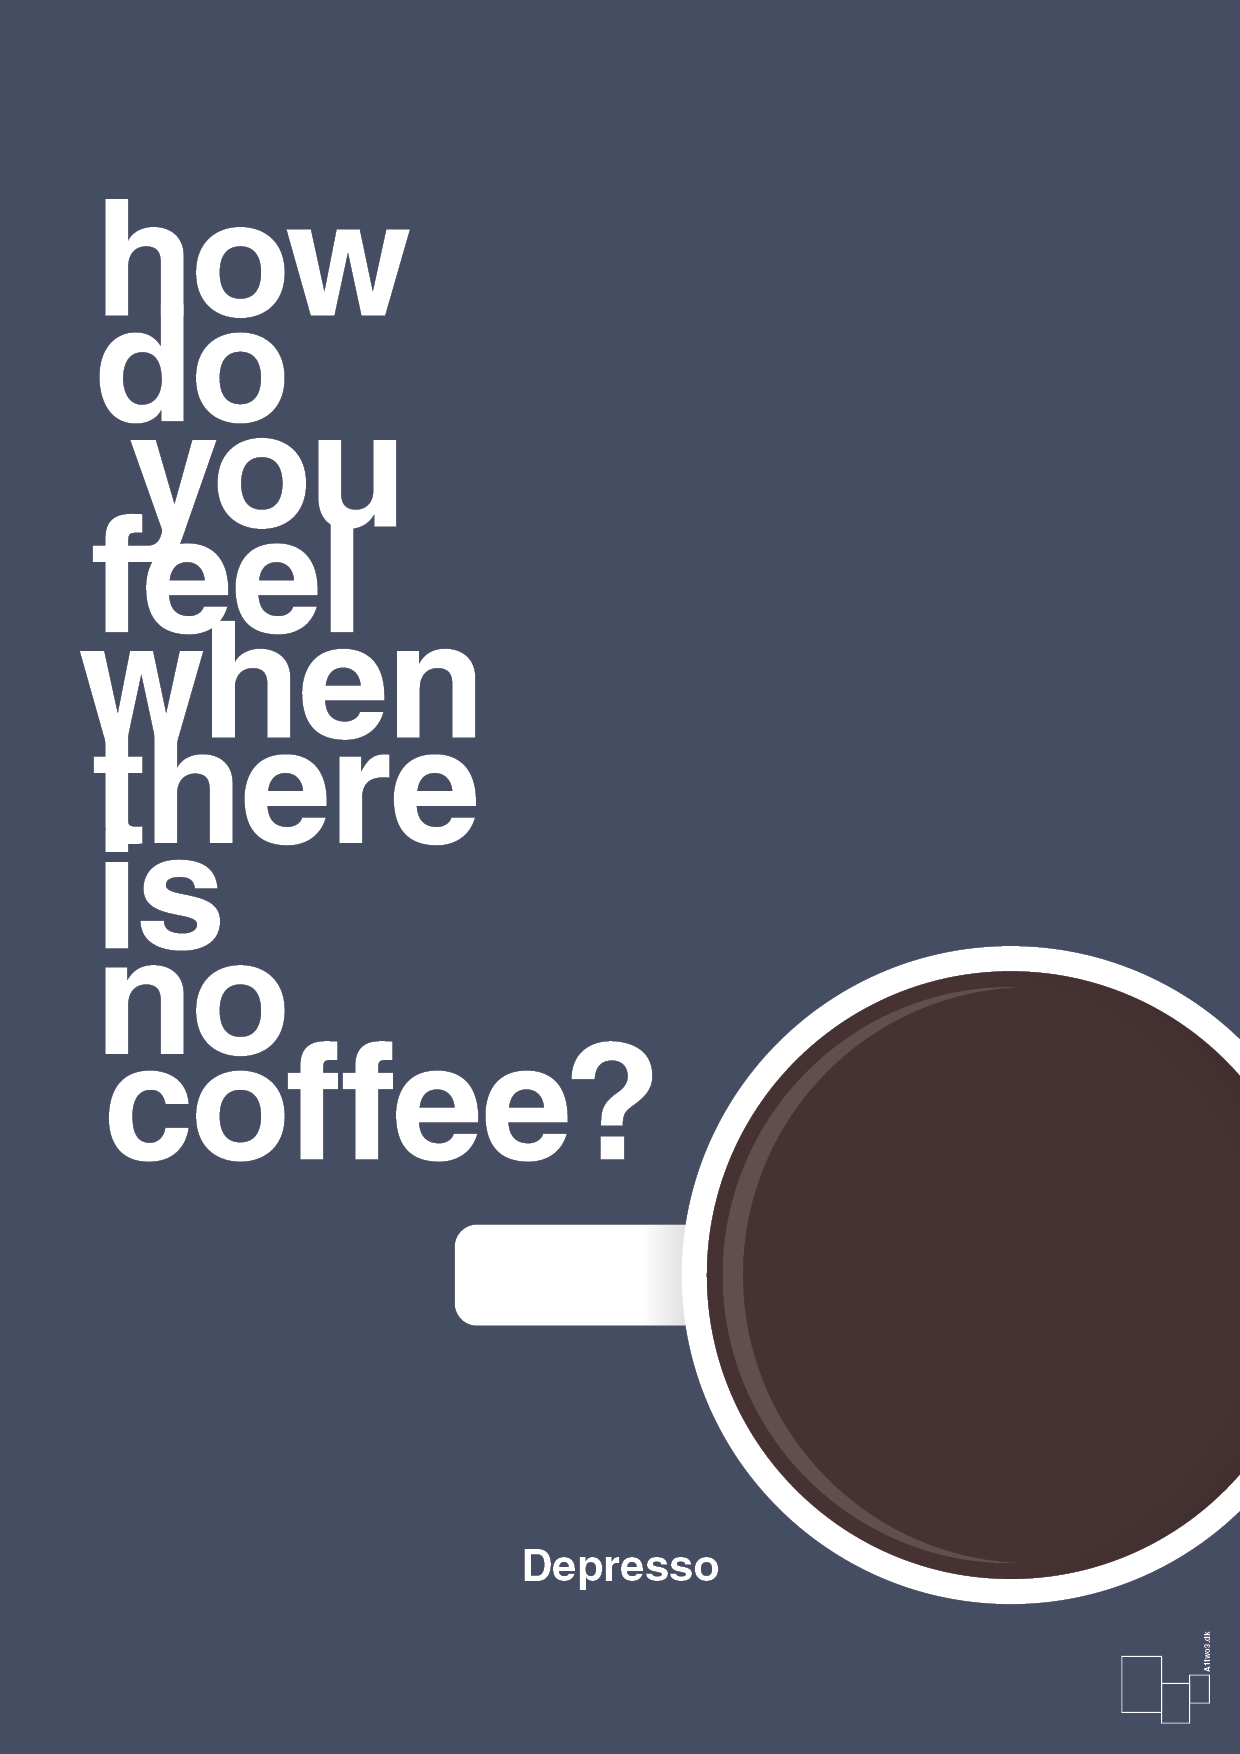 how do you feel when there is no coffee? depresso - Plakat med Mad & Drikke i Petrol